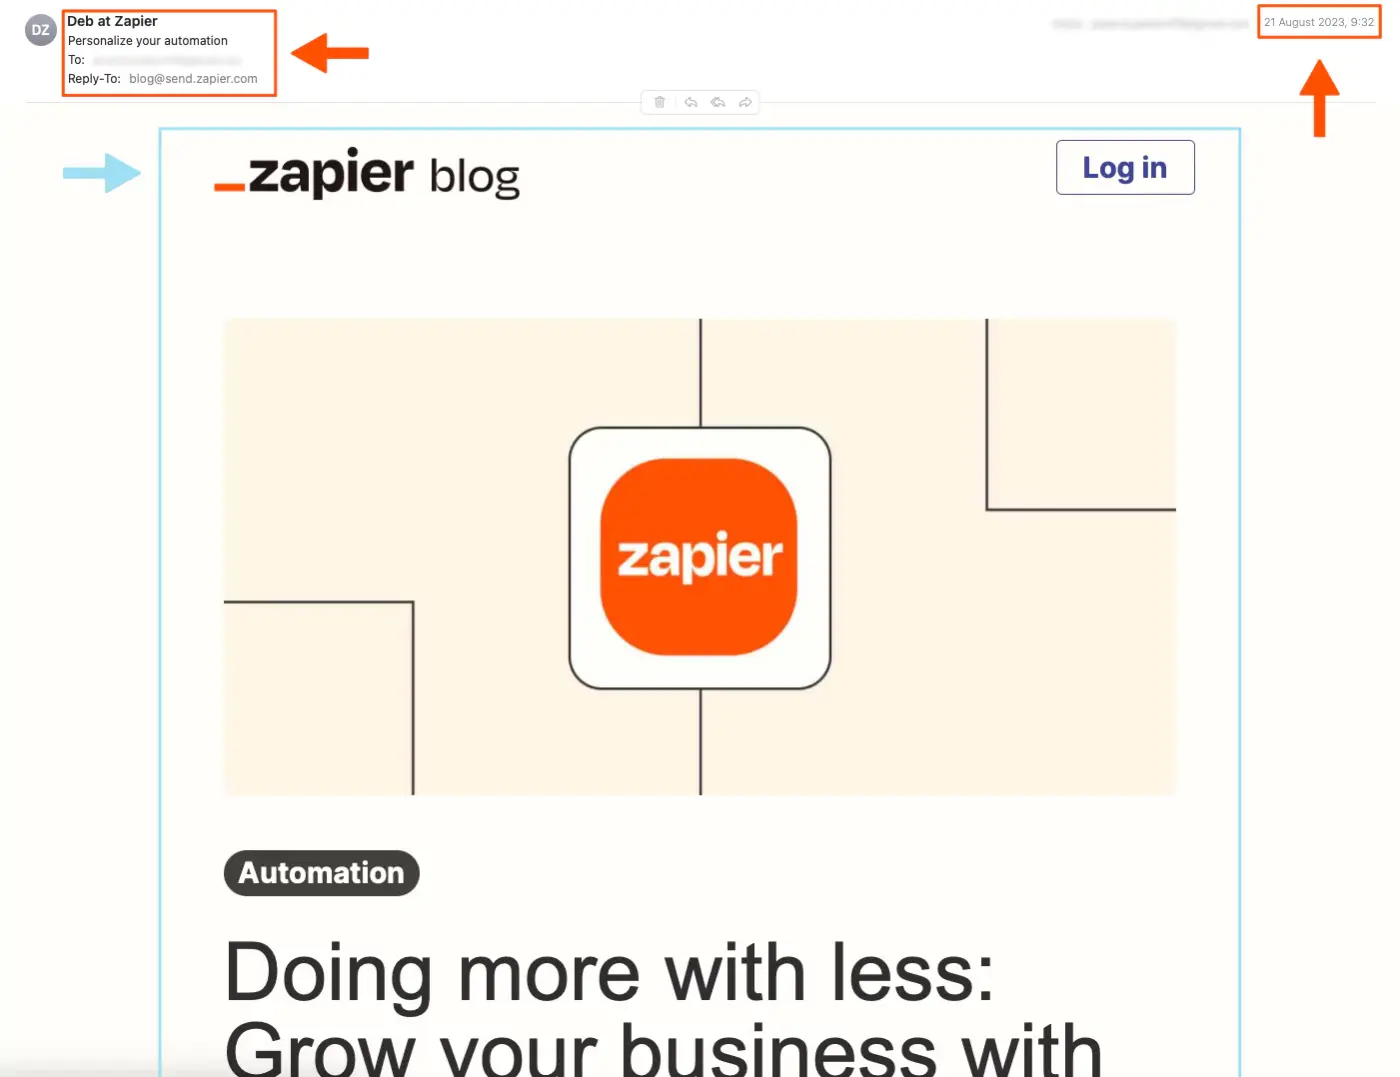 Screenshot of an email from Zapier that says "Do more with less: Grow your business with automation" with arrows pointing to the sender, date, recipient, subject line, and the content itself